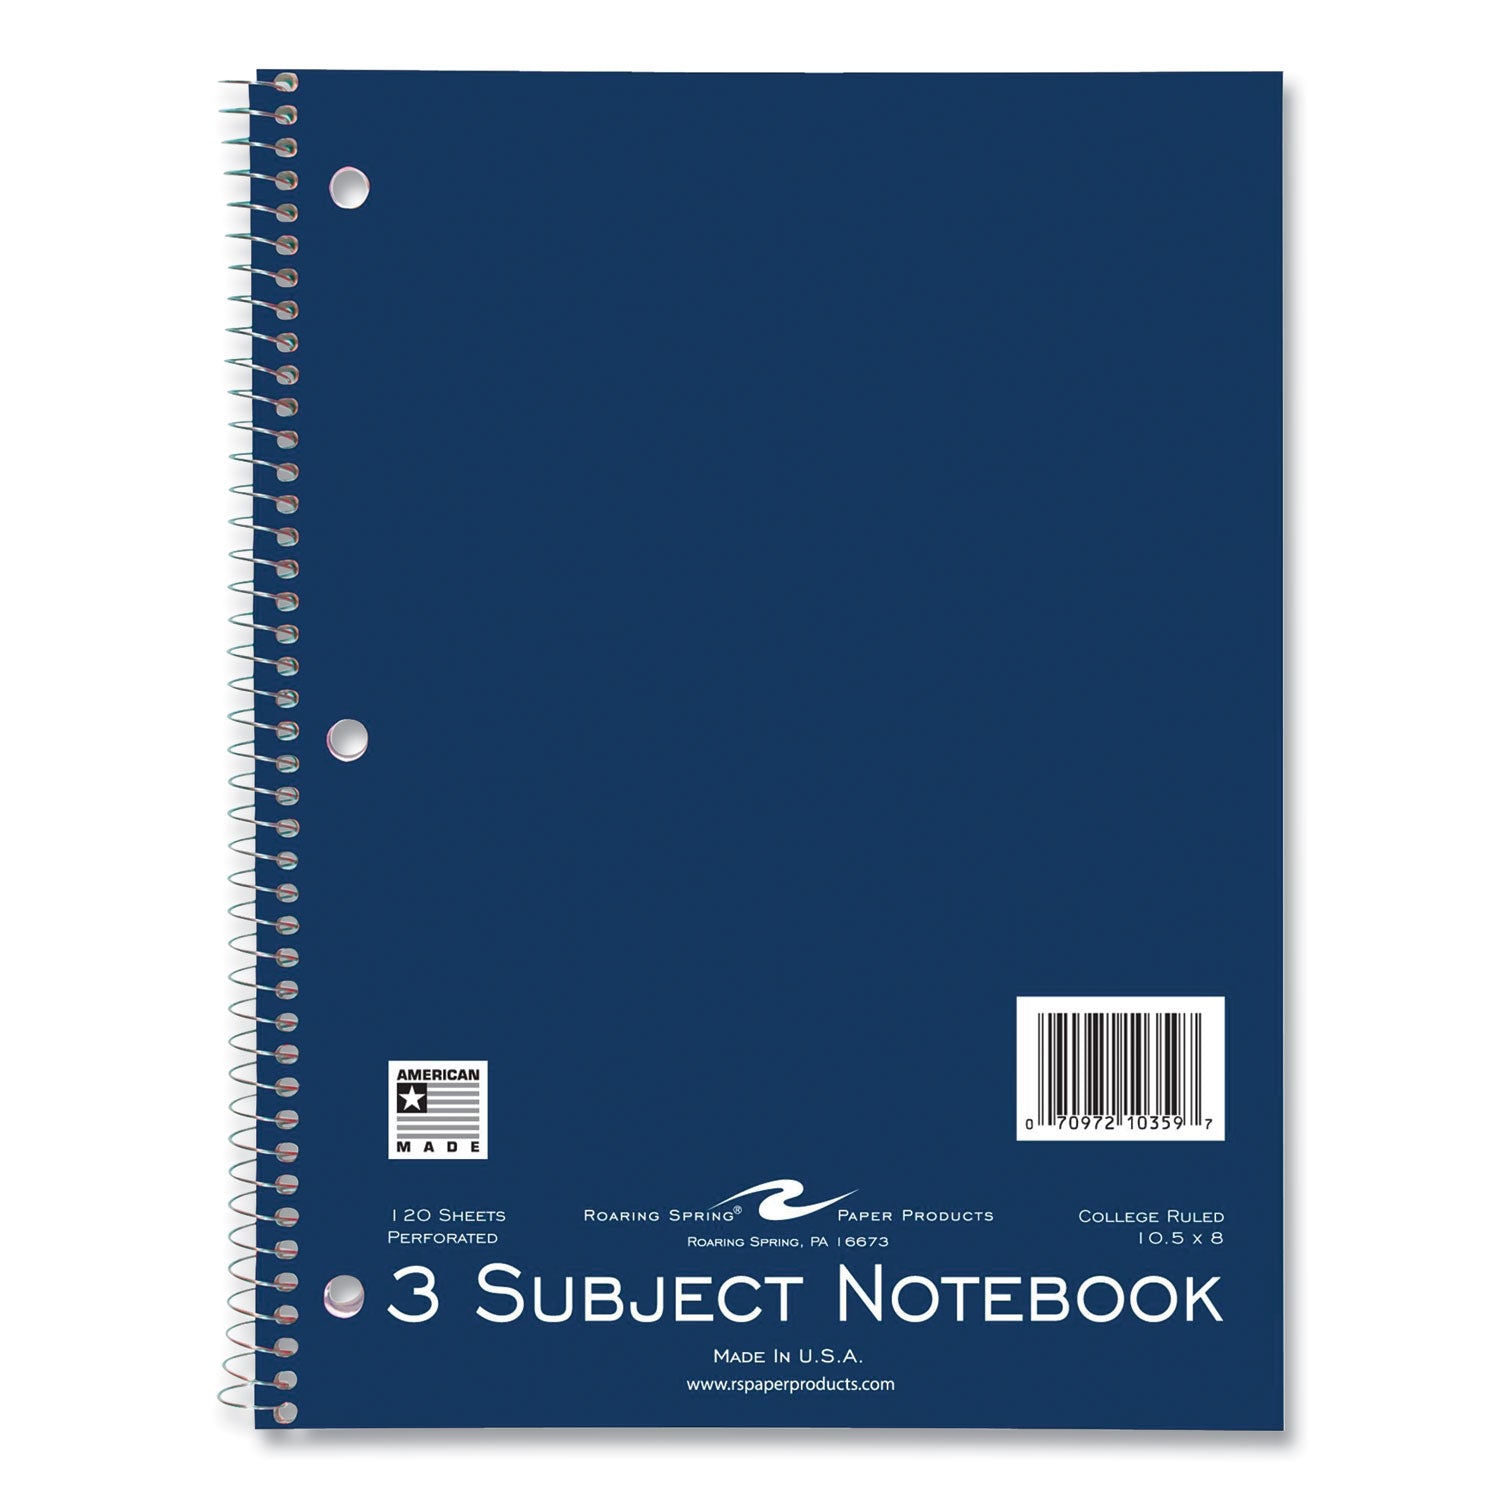 subject-wirebound-notebook-3-subject-medium-college-rule-asst-cover-120-105-x-8-sheets-24-ct-ships-in-4-6-bus-days_roa10359cs - 2